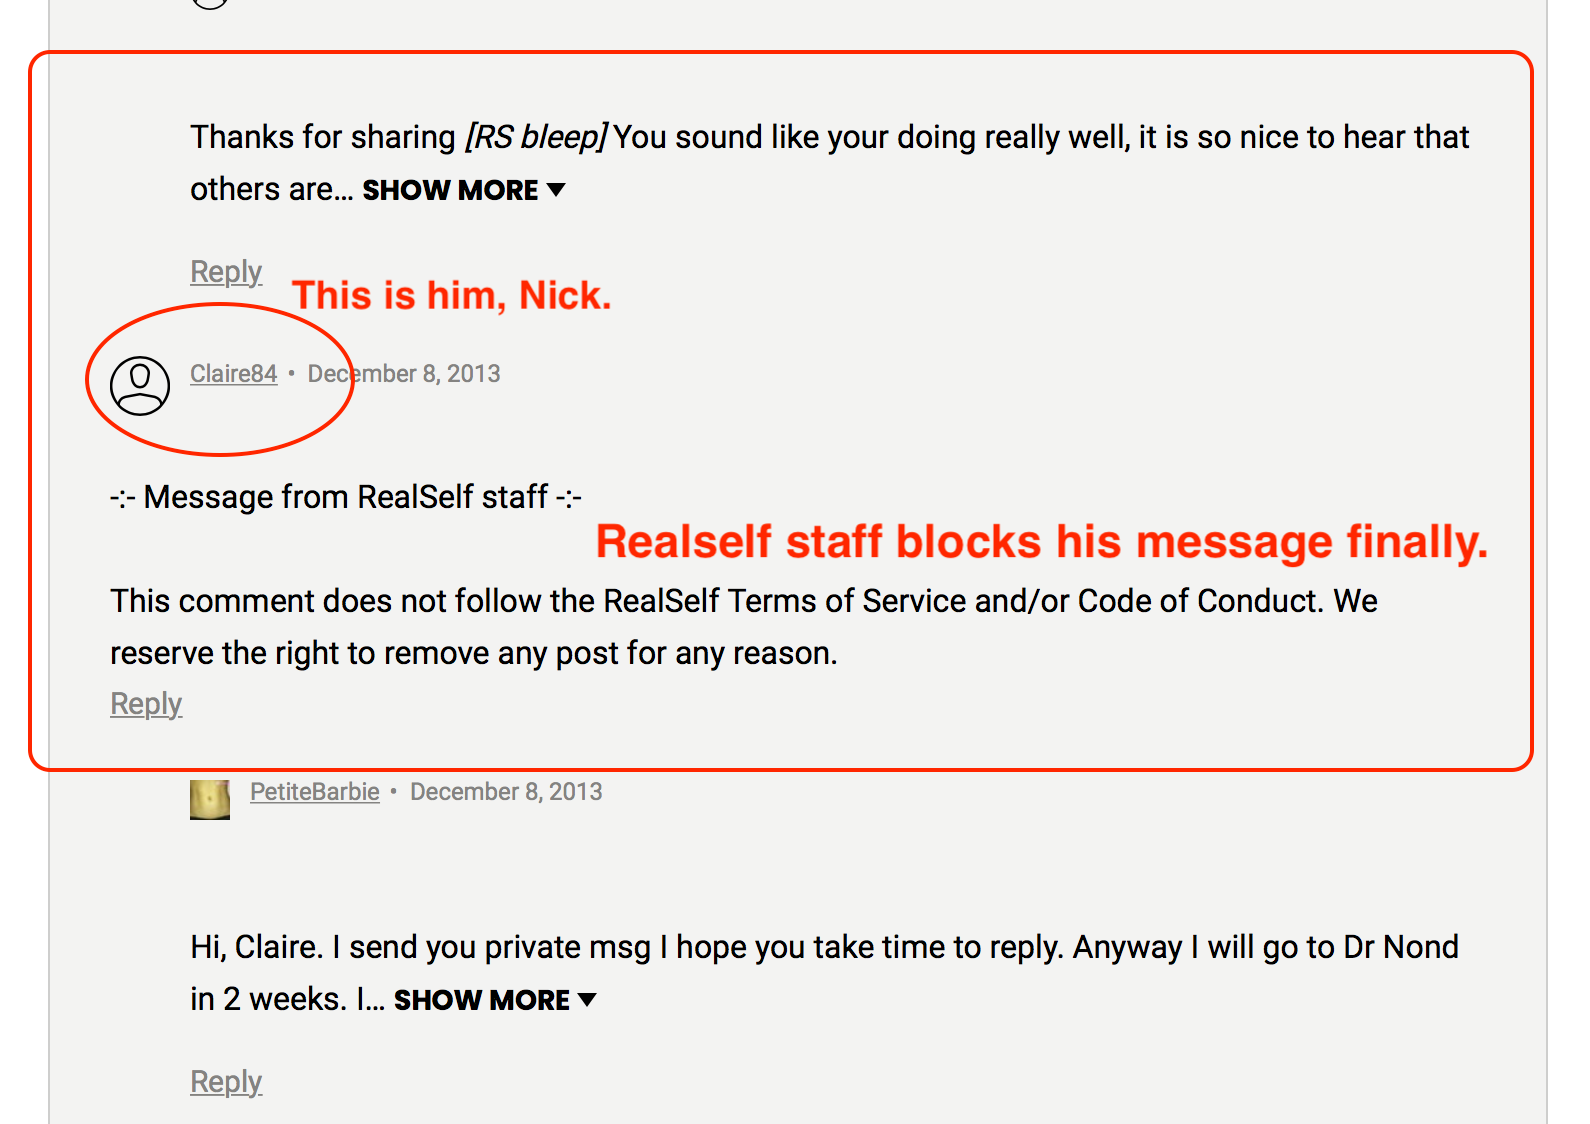 Nick as Claire84: his message is blocked by Realself staff